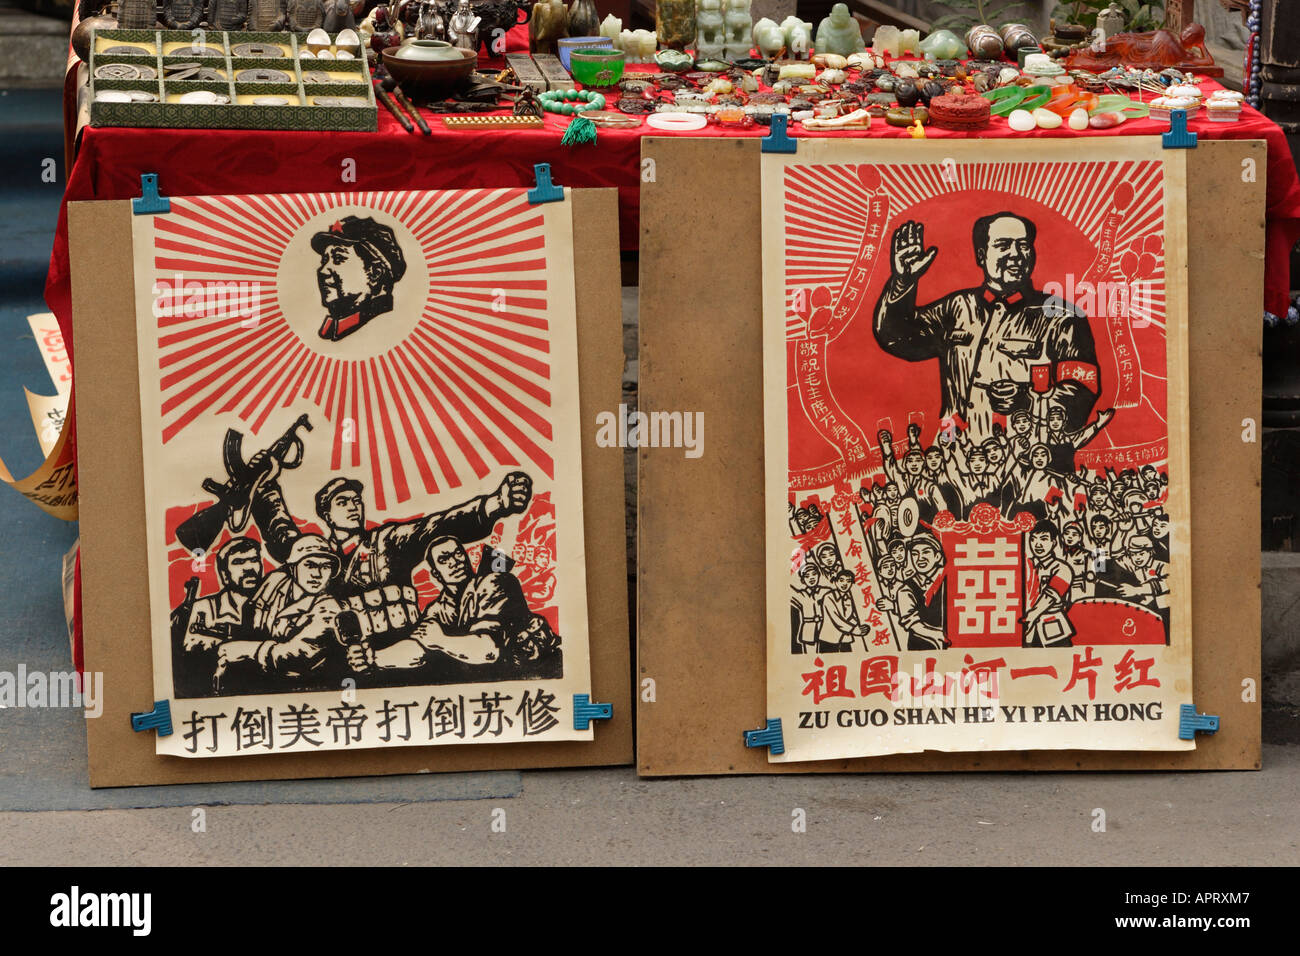 Typical stall selling antiques curios souvenirs Mao Zedong memoribilia posters Liulichang Street Market Beijing China Stock Photo